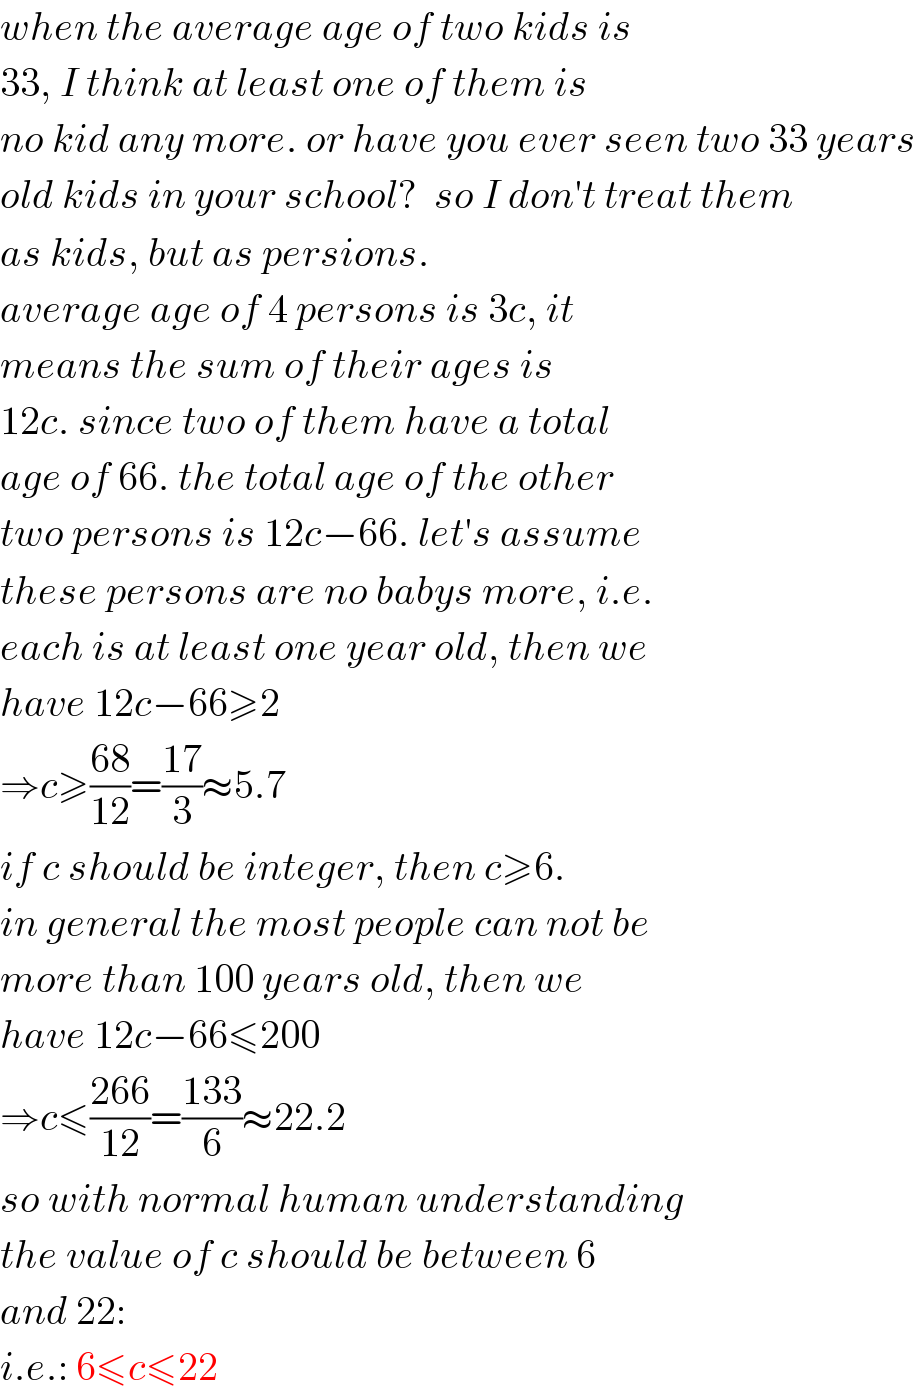 when the average age of two kids is  33, I think at least one of them is  no kid any more. or have you ever seen two 33 years  old kids in your school?  so I don′t treat them  as kids, but as persions.  average age of 4 persons is 3c, it  means the sum of their ages is  12c. since two of them have a total  age of 66. the total age of the other  two persons is 12c−66. let′s assume  these persons are no babys more, i.e.  each is at least one year old, then we  have 12c−66≥2  ⇒c≥((68)/(12))=((17)/3)≈5.7  if c should be integer, then c≥6.  in general the most people can not be  more than 100 years old, then we  have 12c−66≤200  ⇒c≤((266)/(12))=((133)/6)≈22.2  so with normal human understanding  the value of c should be between 6  and 22:  i.e.: 6≤c≤22  